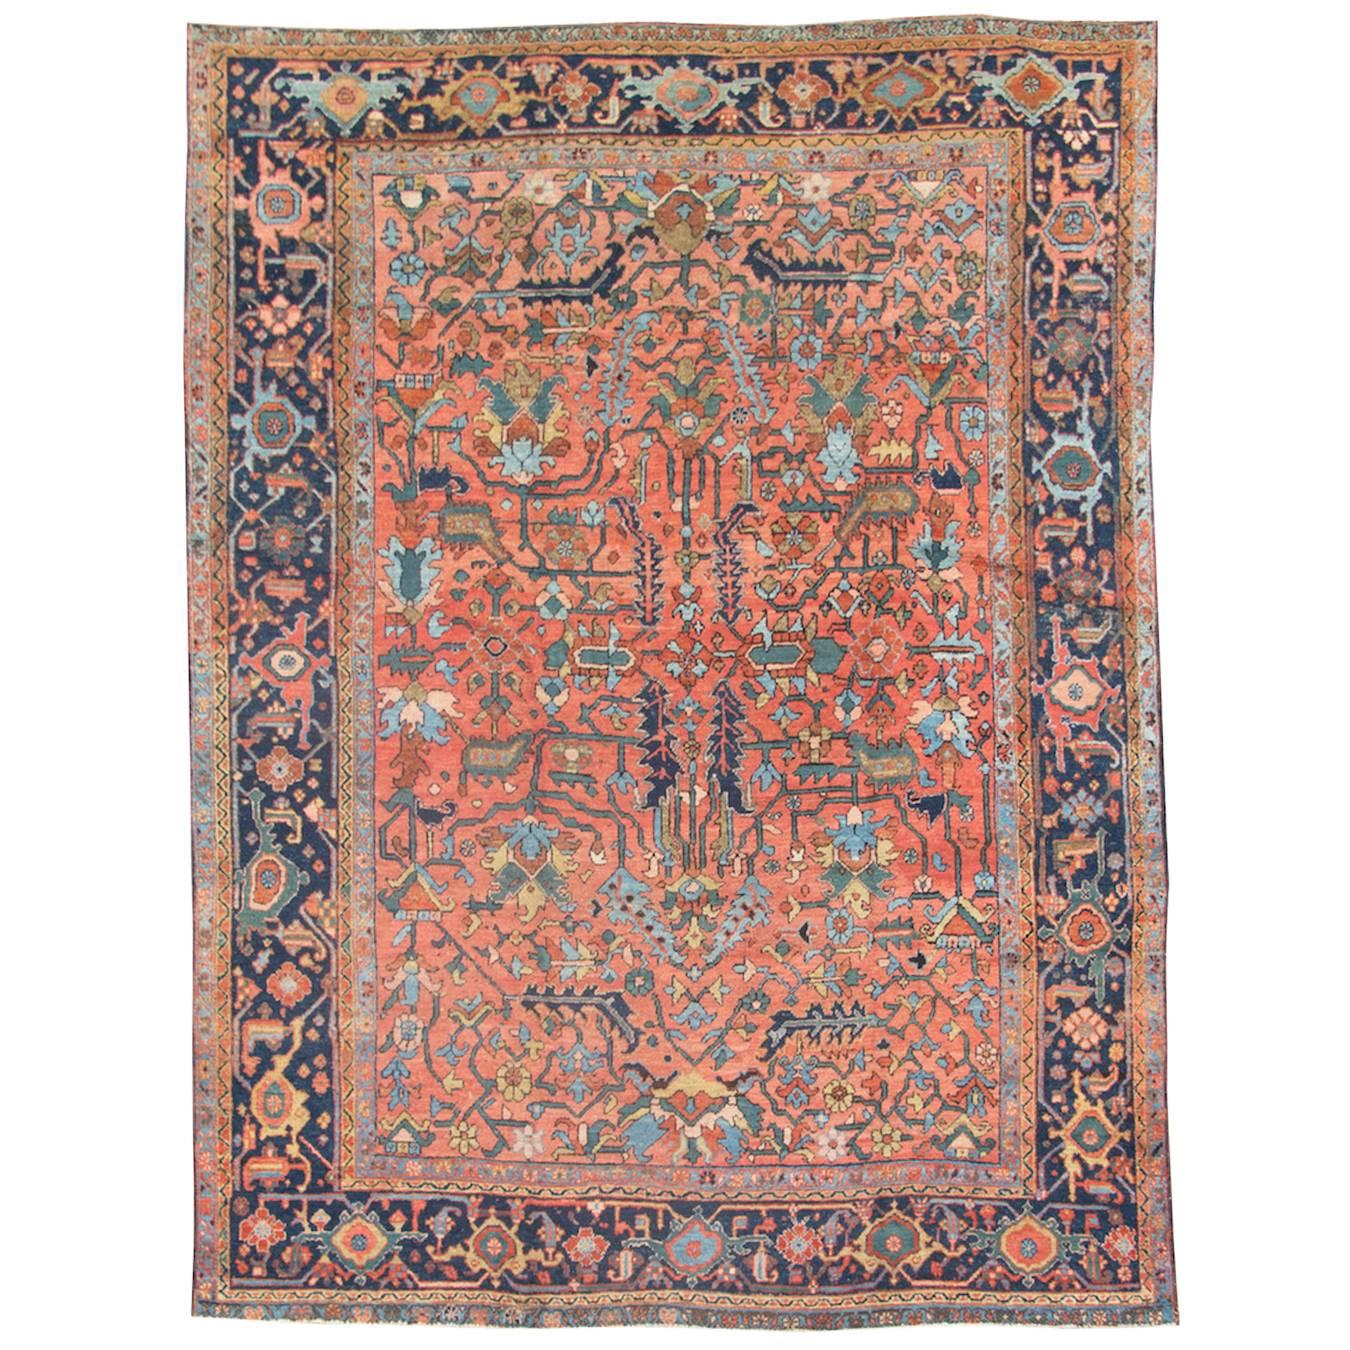 Early 20th Century Red and Indigo Heriz Carpet with Palmettes and Blossoms